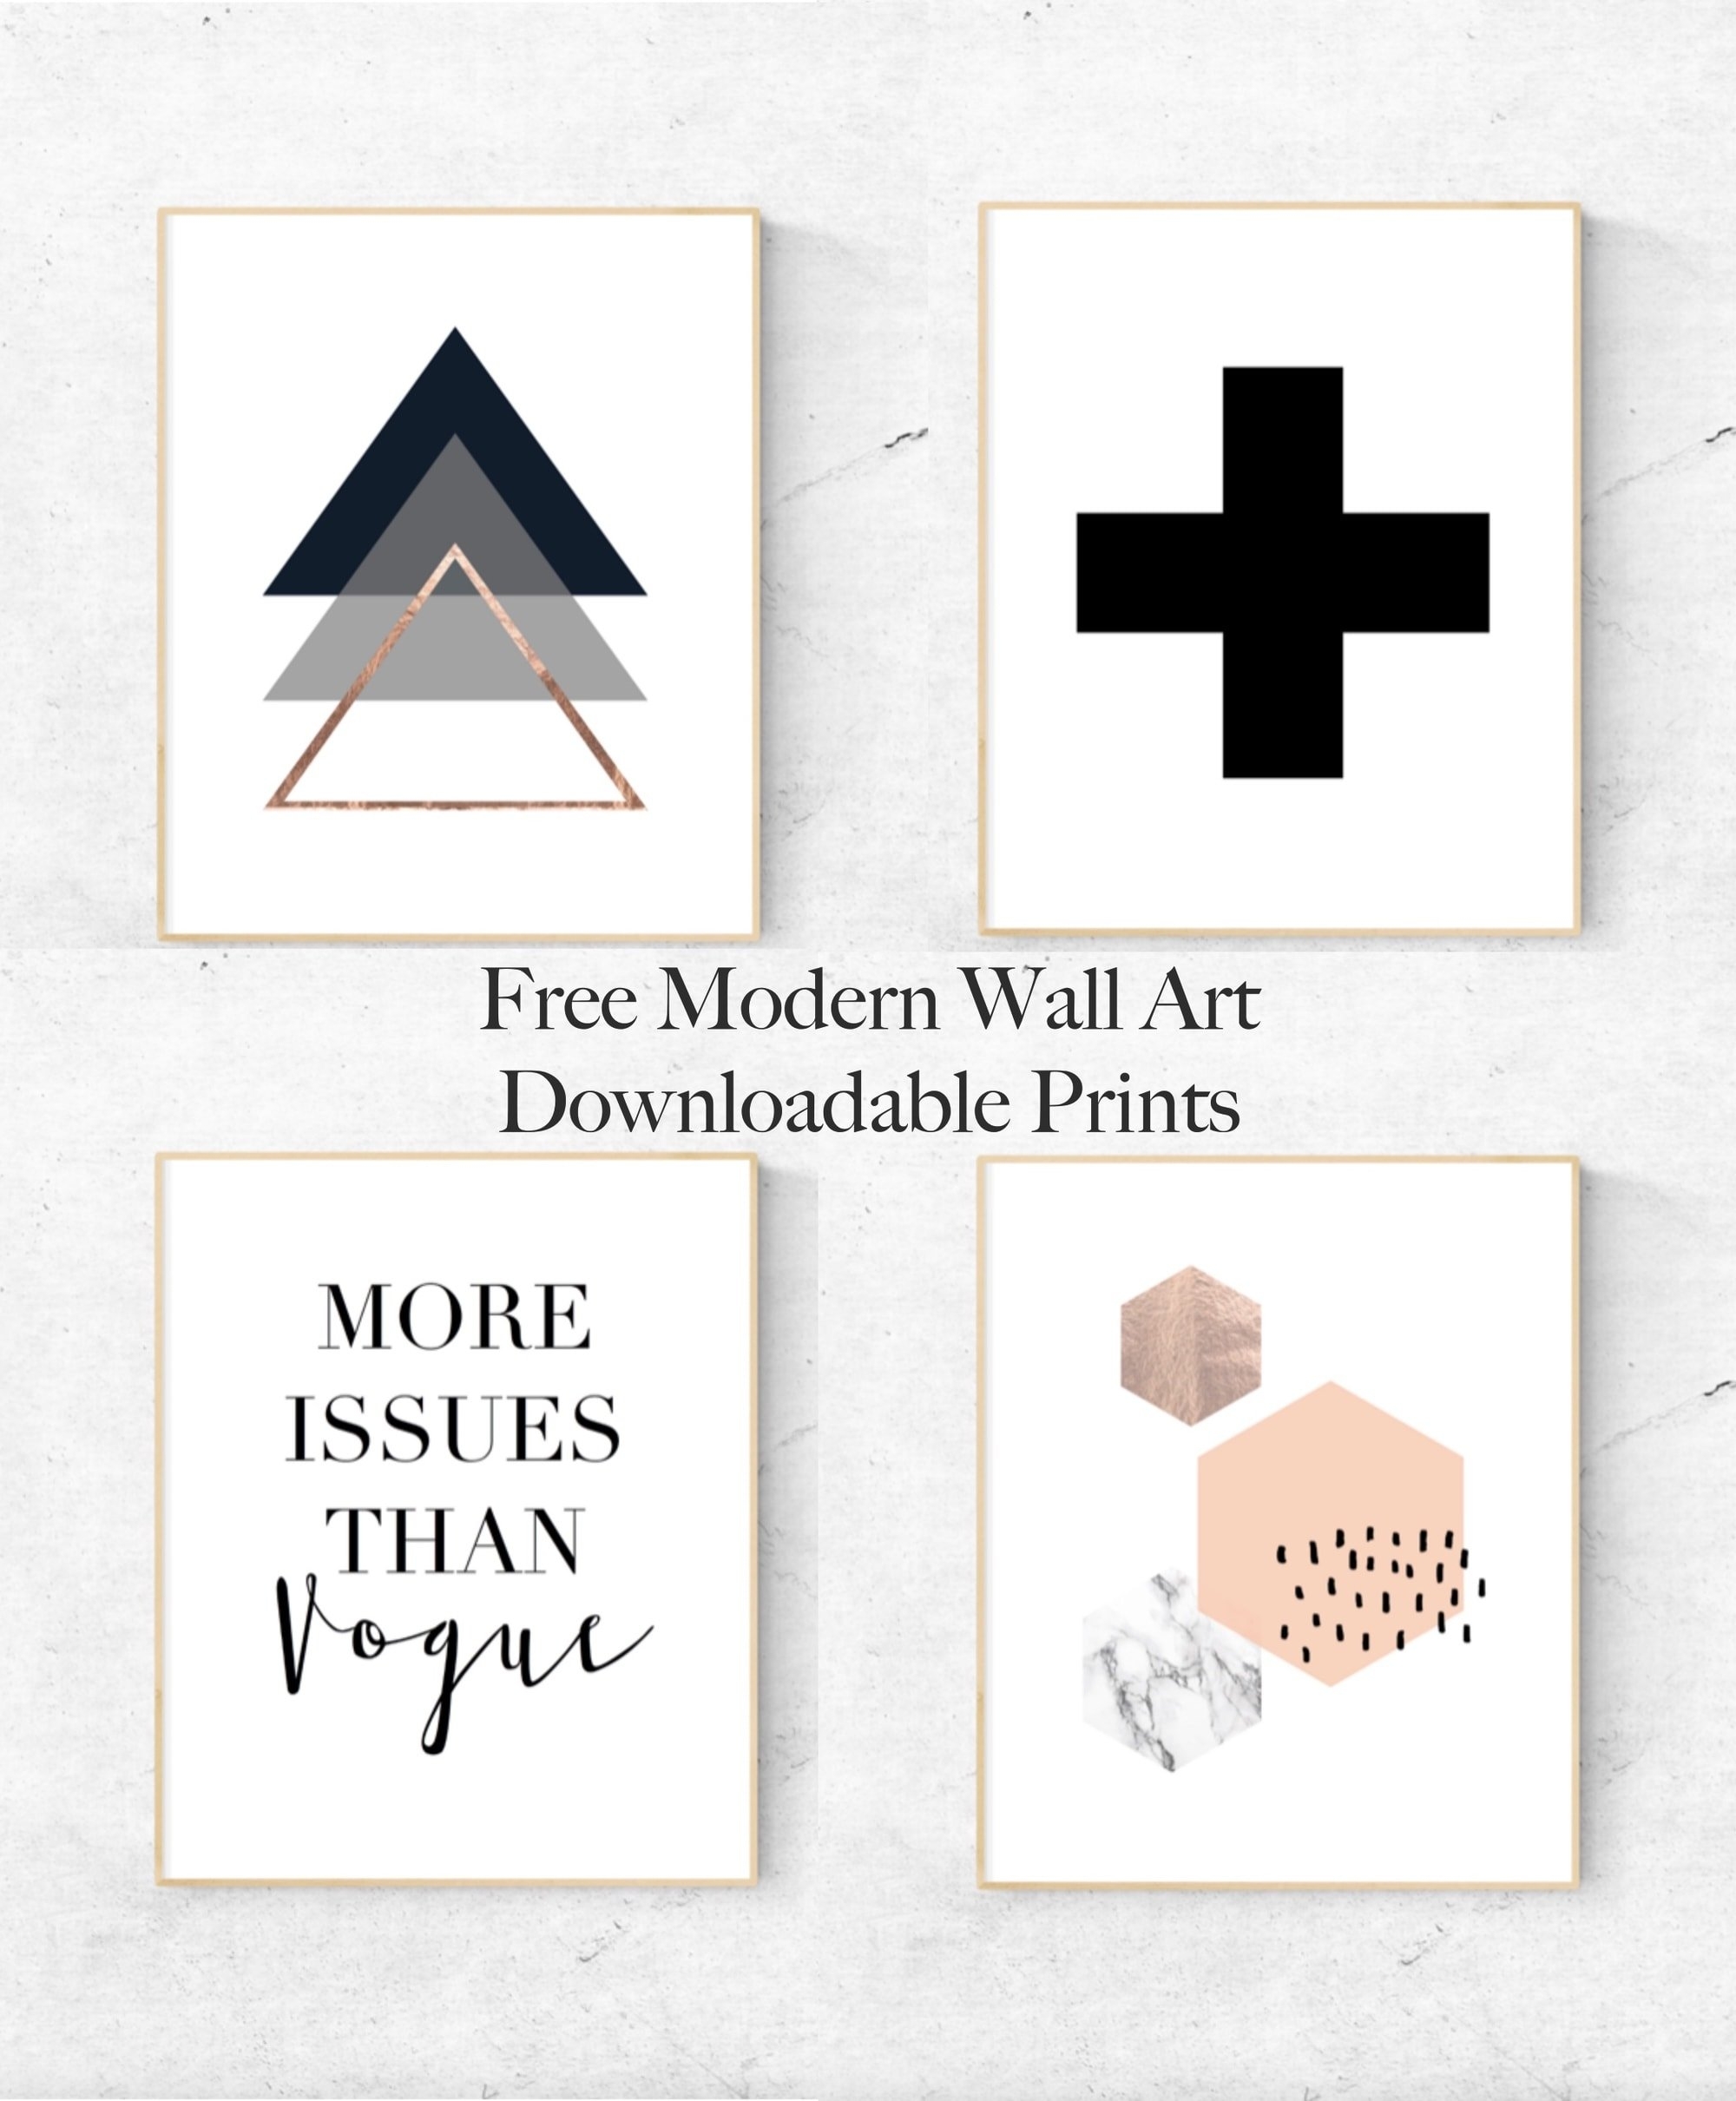 Free Modern Wall Art Downloadable Prints - Free Printable Art Pictures